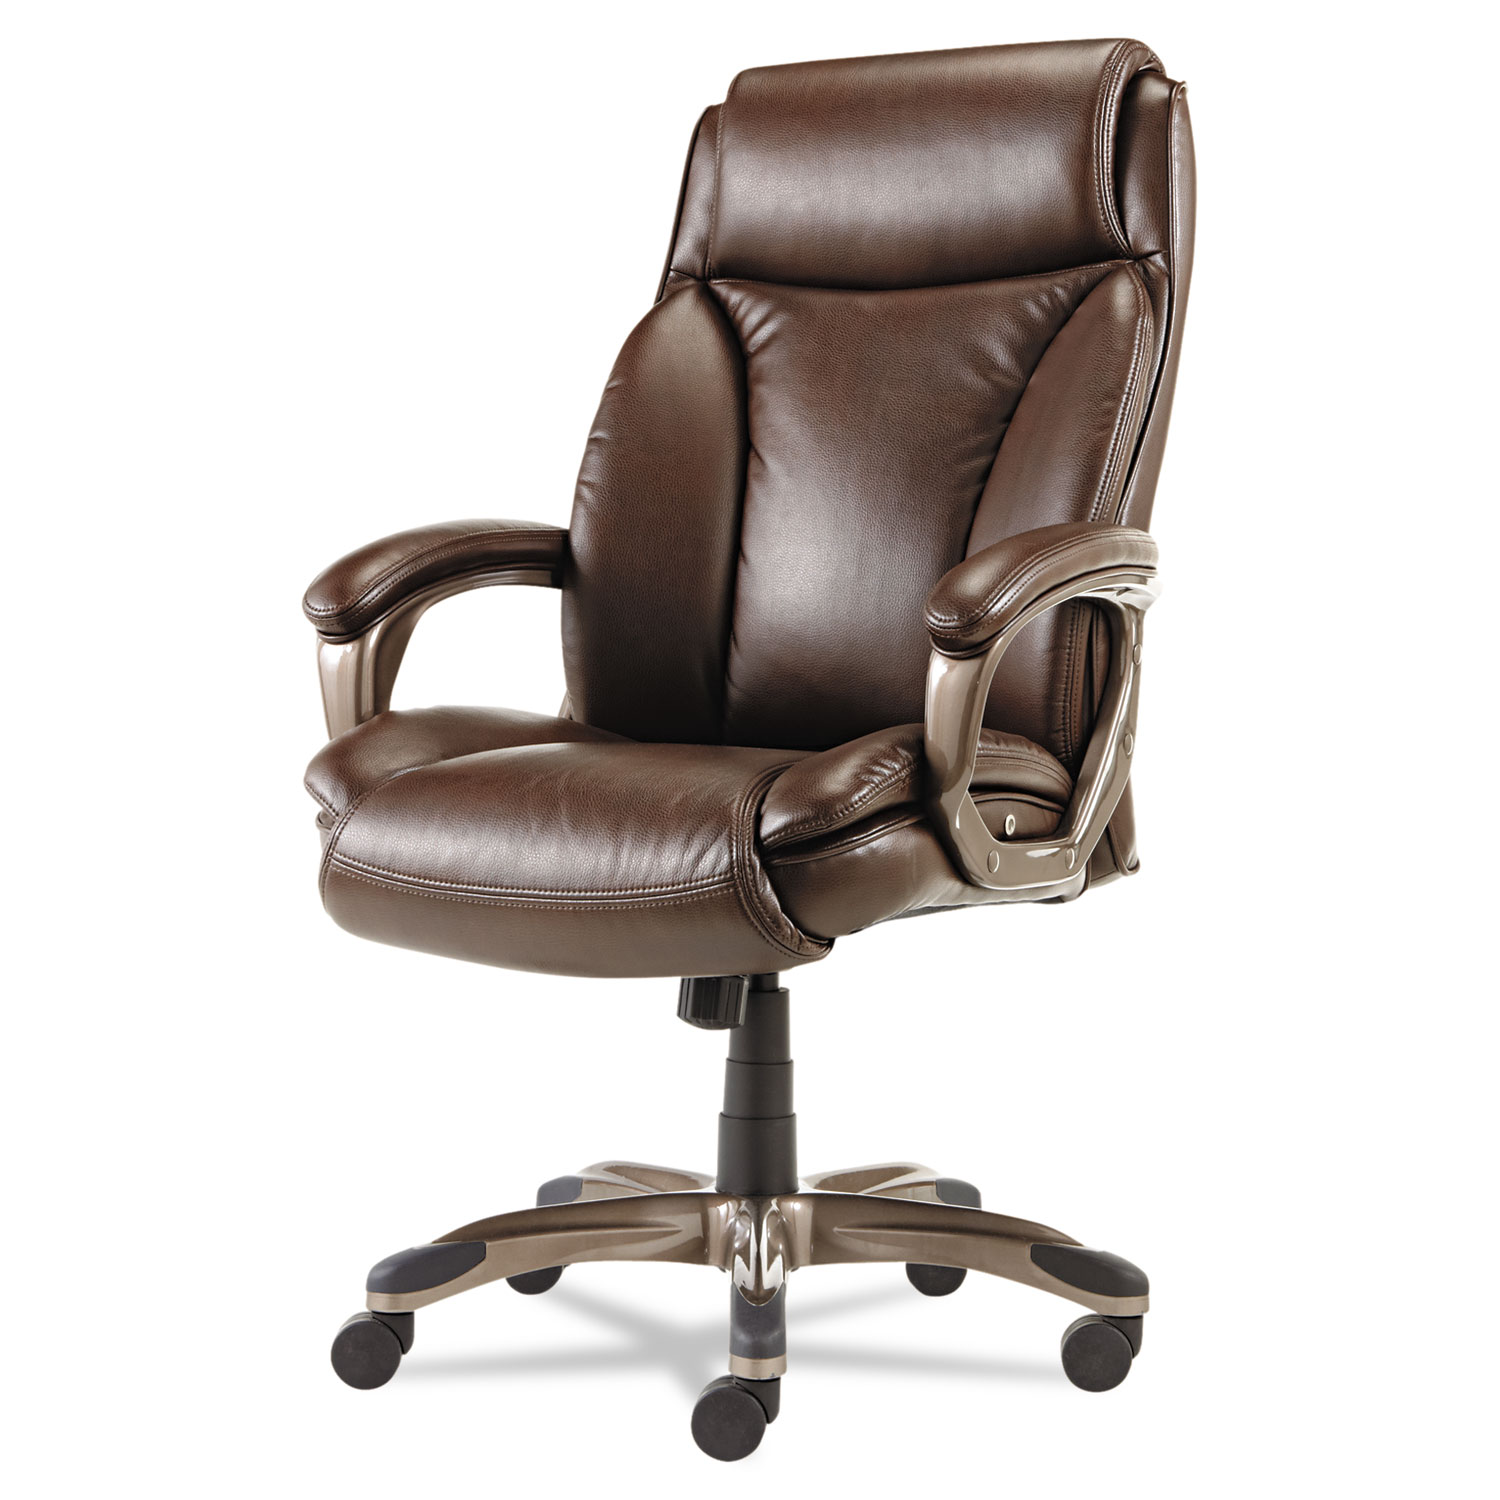  Alera ALEVN4159 Alera Veon Series Executive High-Back Leather Chair, Supports up to 275 lbs., Brown Seat/Brown Back, Bronze Base (ALEVN4159) 